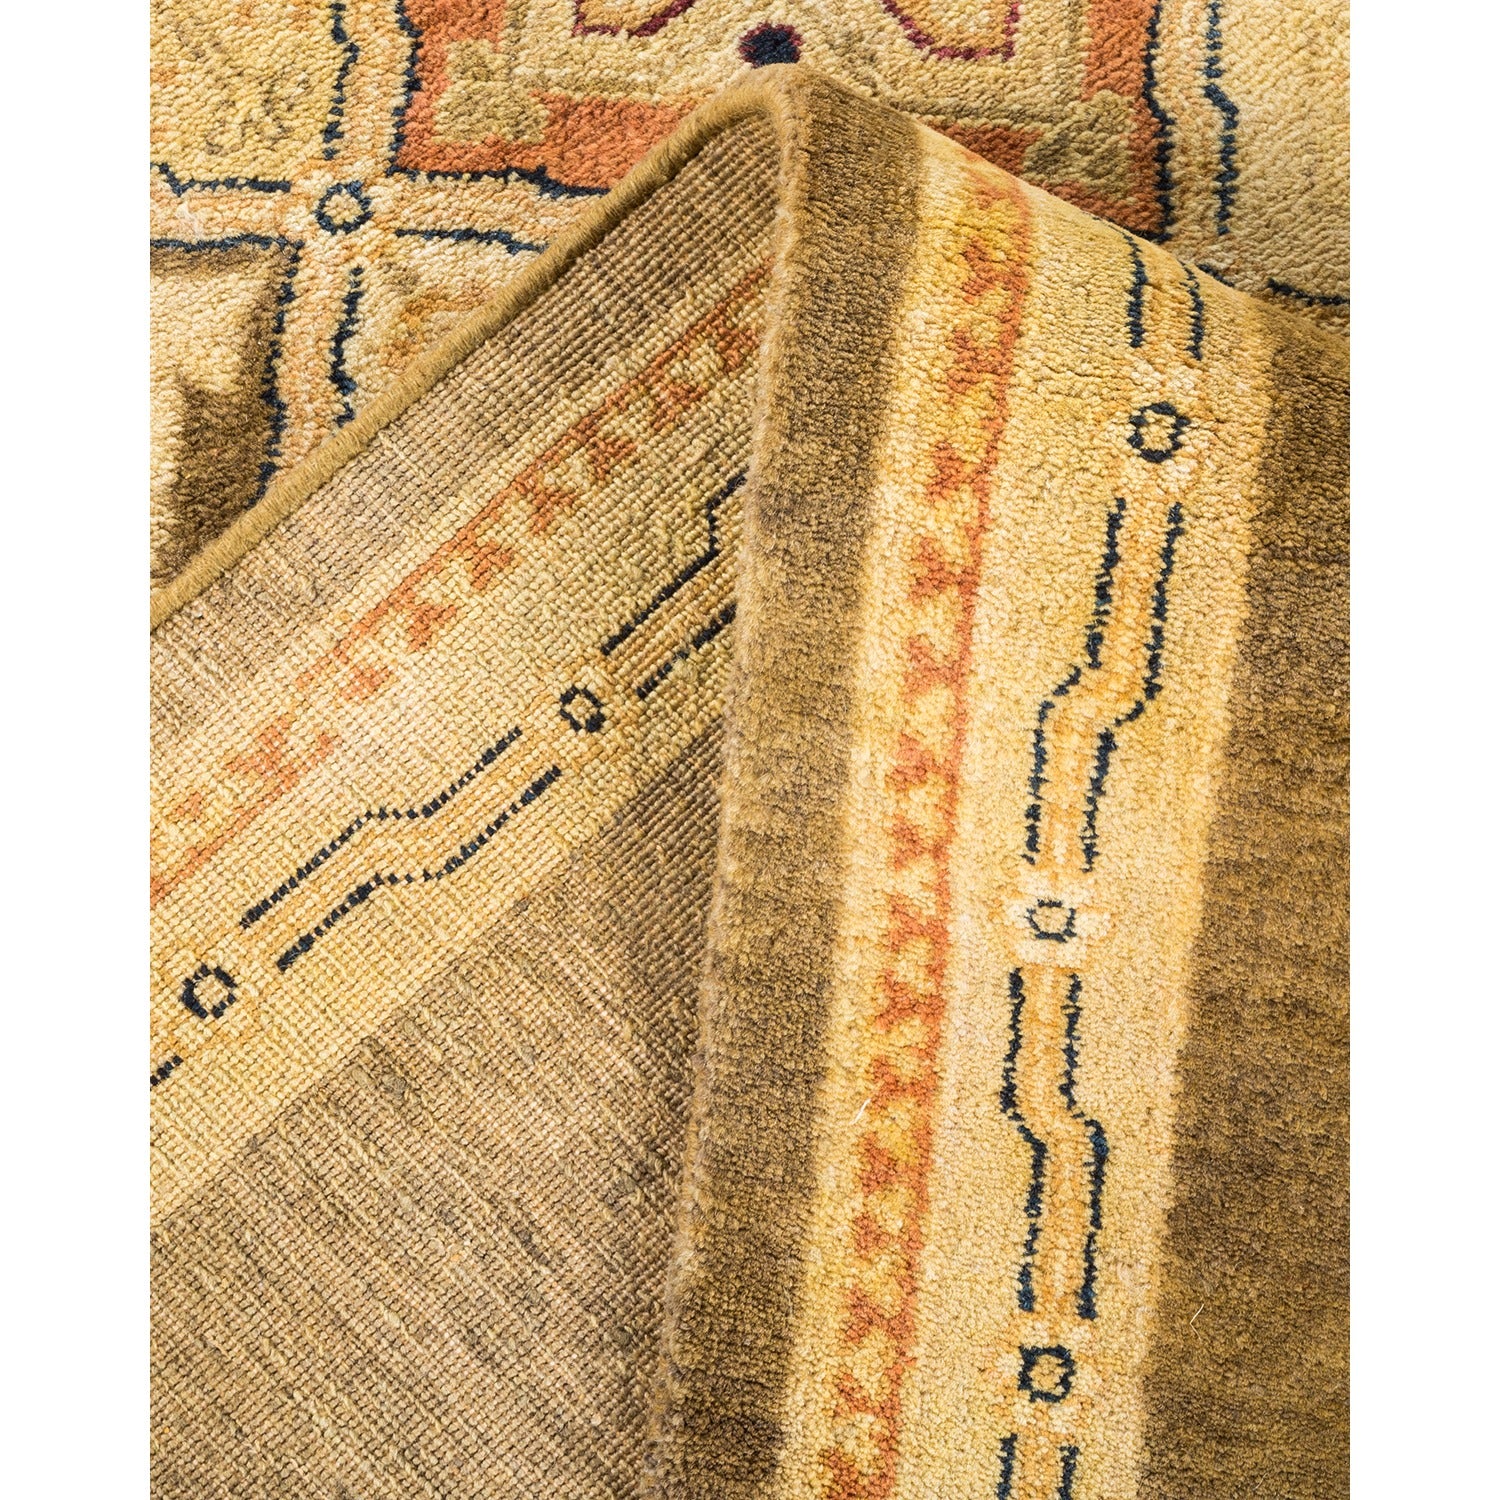 Close-up of folded textile reveals intricate traditional rug design.